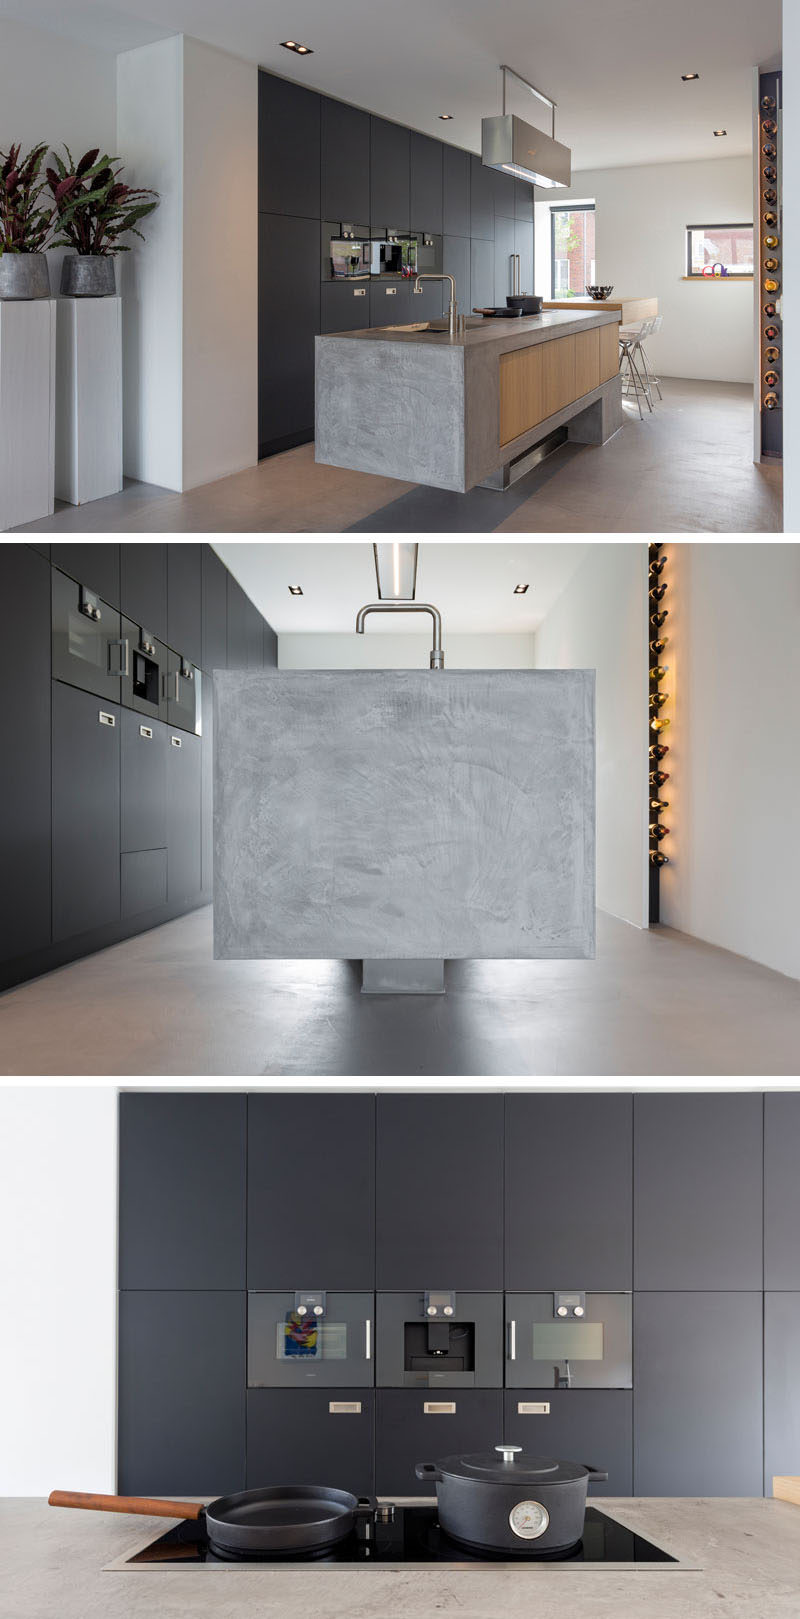 This kitchen palette is a combination of wood, steel and concrete, and it appears to float above the floor. A small area for wine storage is also included that features hidden lighting, essentially placing the wine on display.